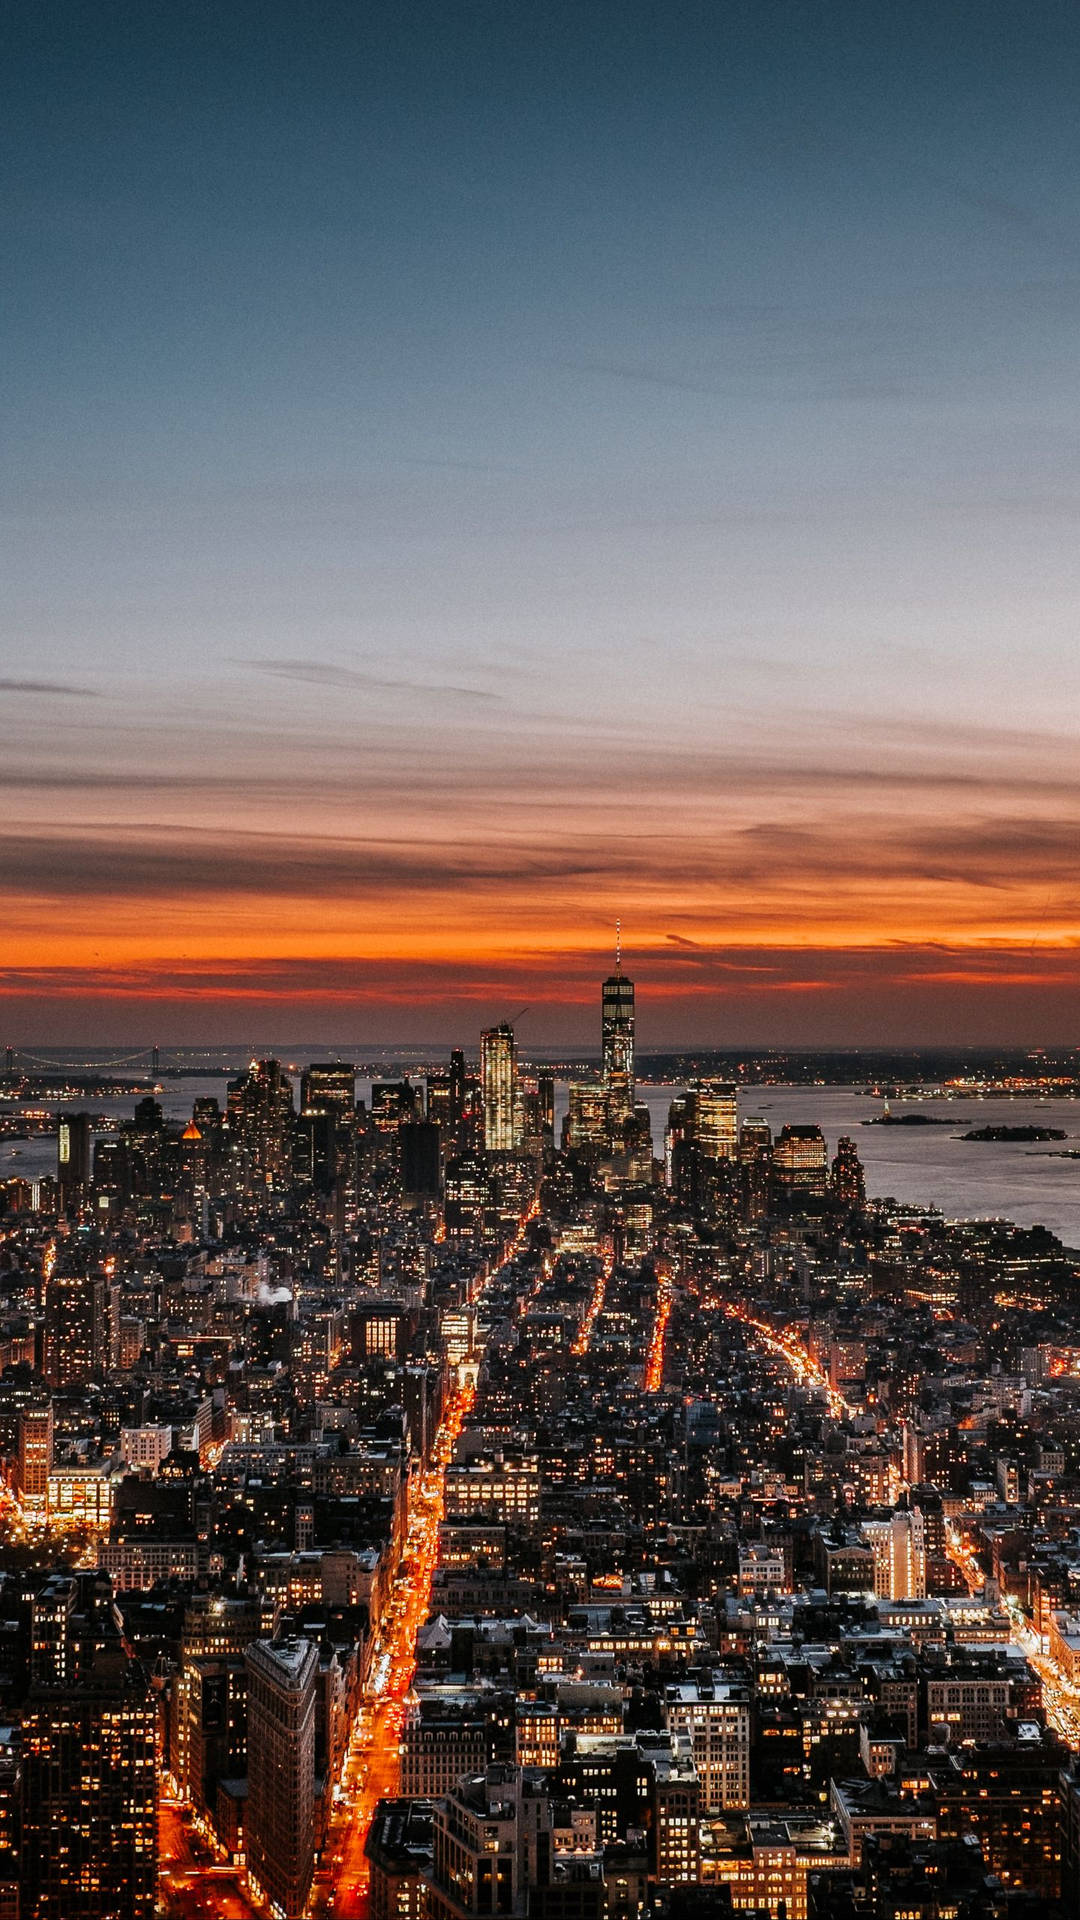 Capturing the Beauty of New York, Looking through an iPhone Wallpaper